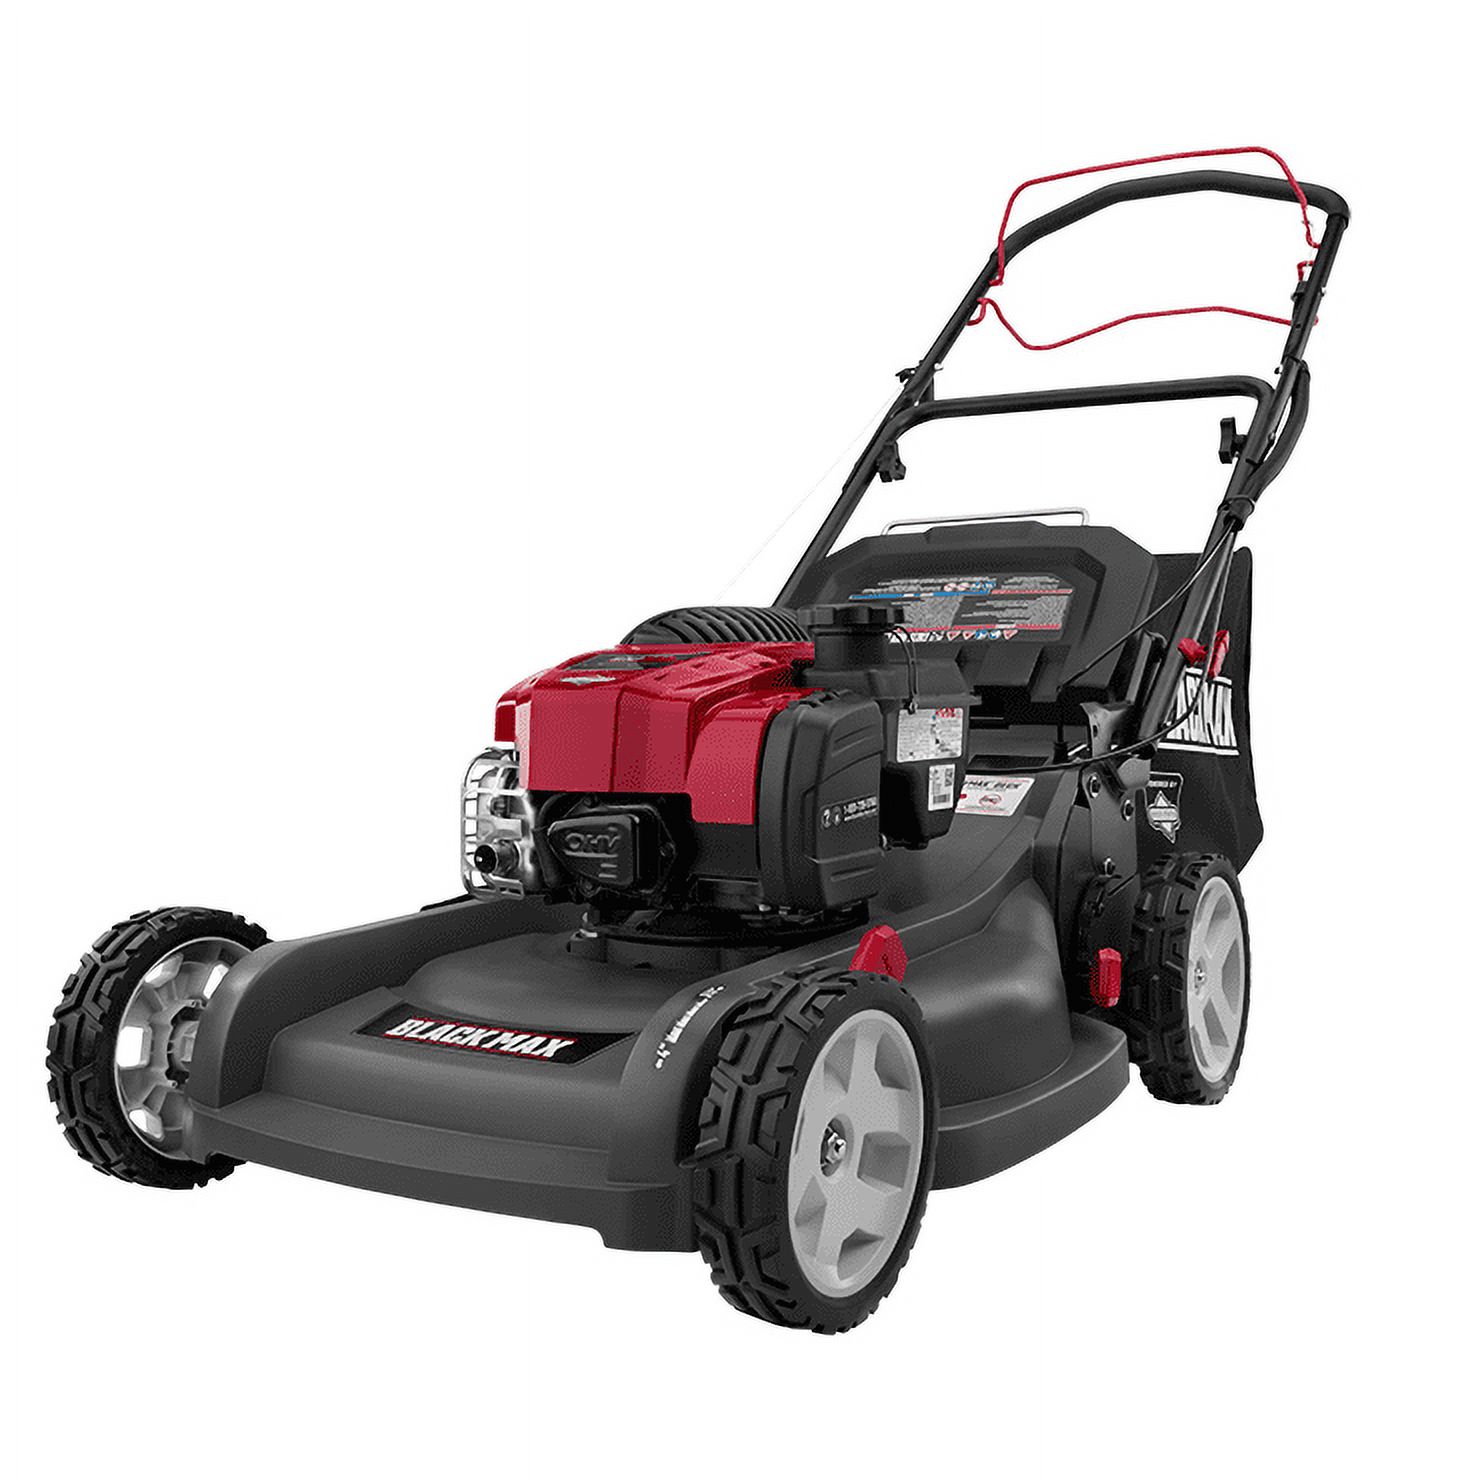 Black Max 21-Inch 150cc Self-Propelled Gas Mower with Briggs & Stratton Engine - image 1 of 8